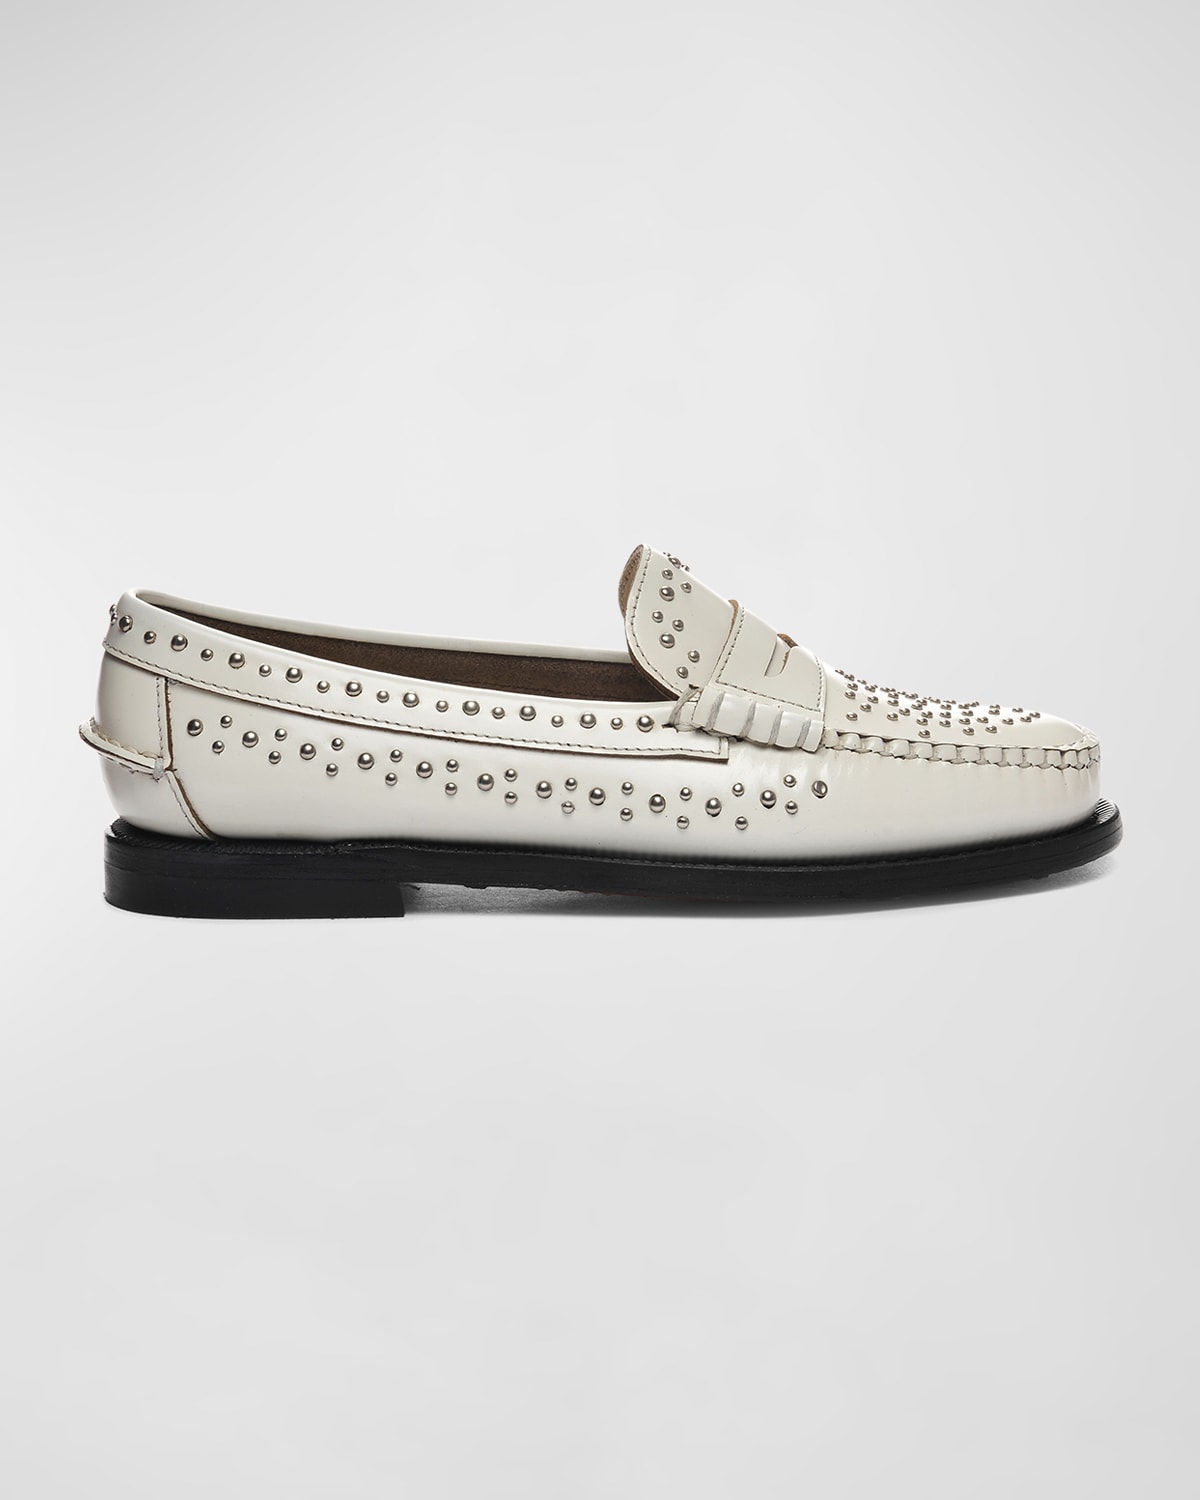 Dan Stud Leather Penny Loafers